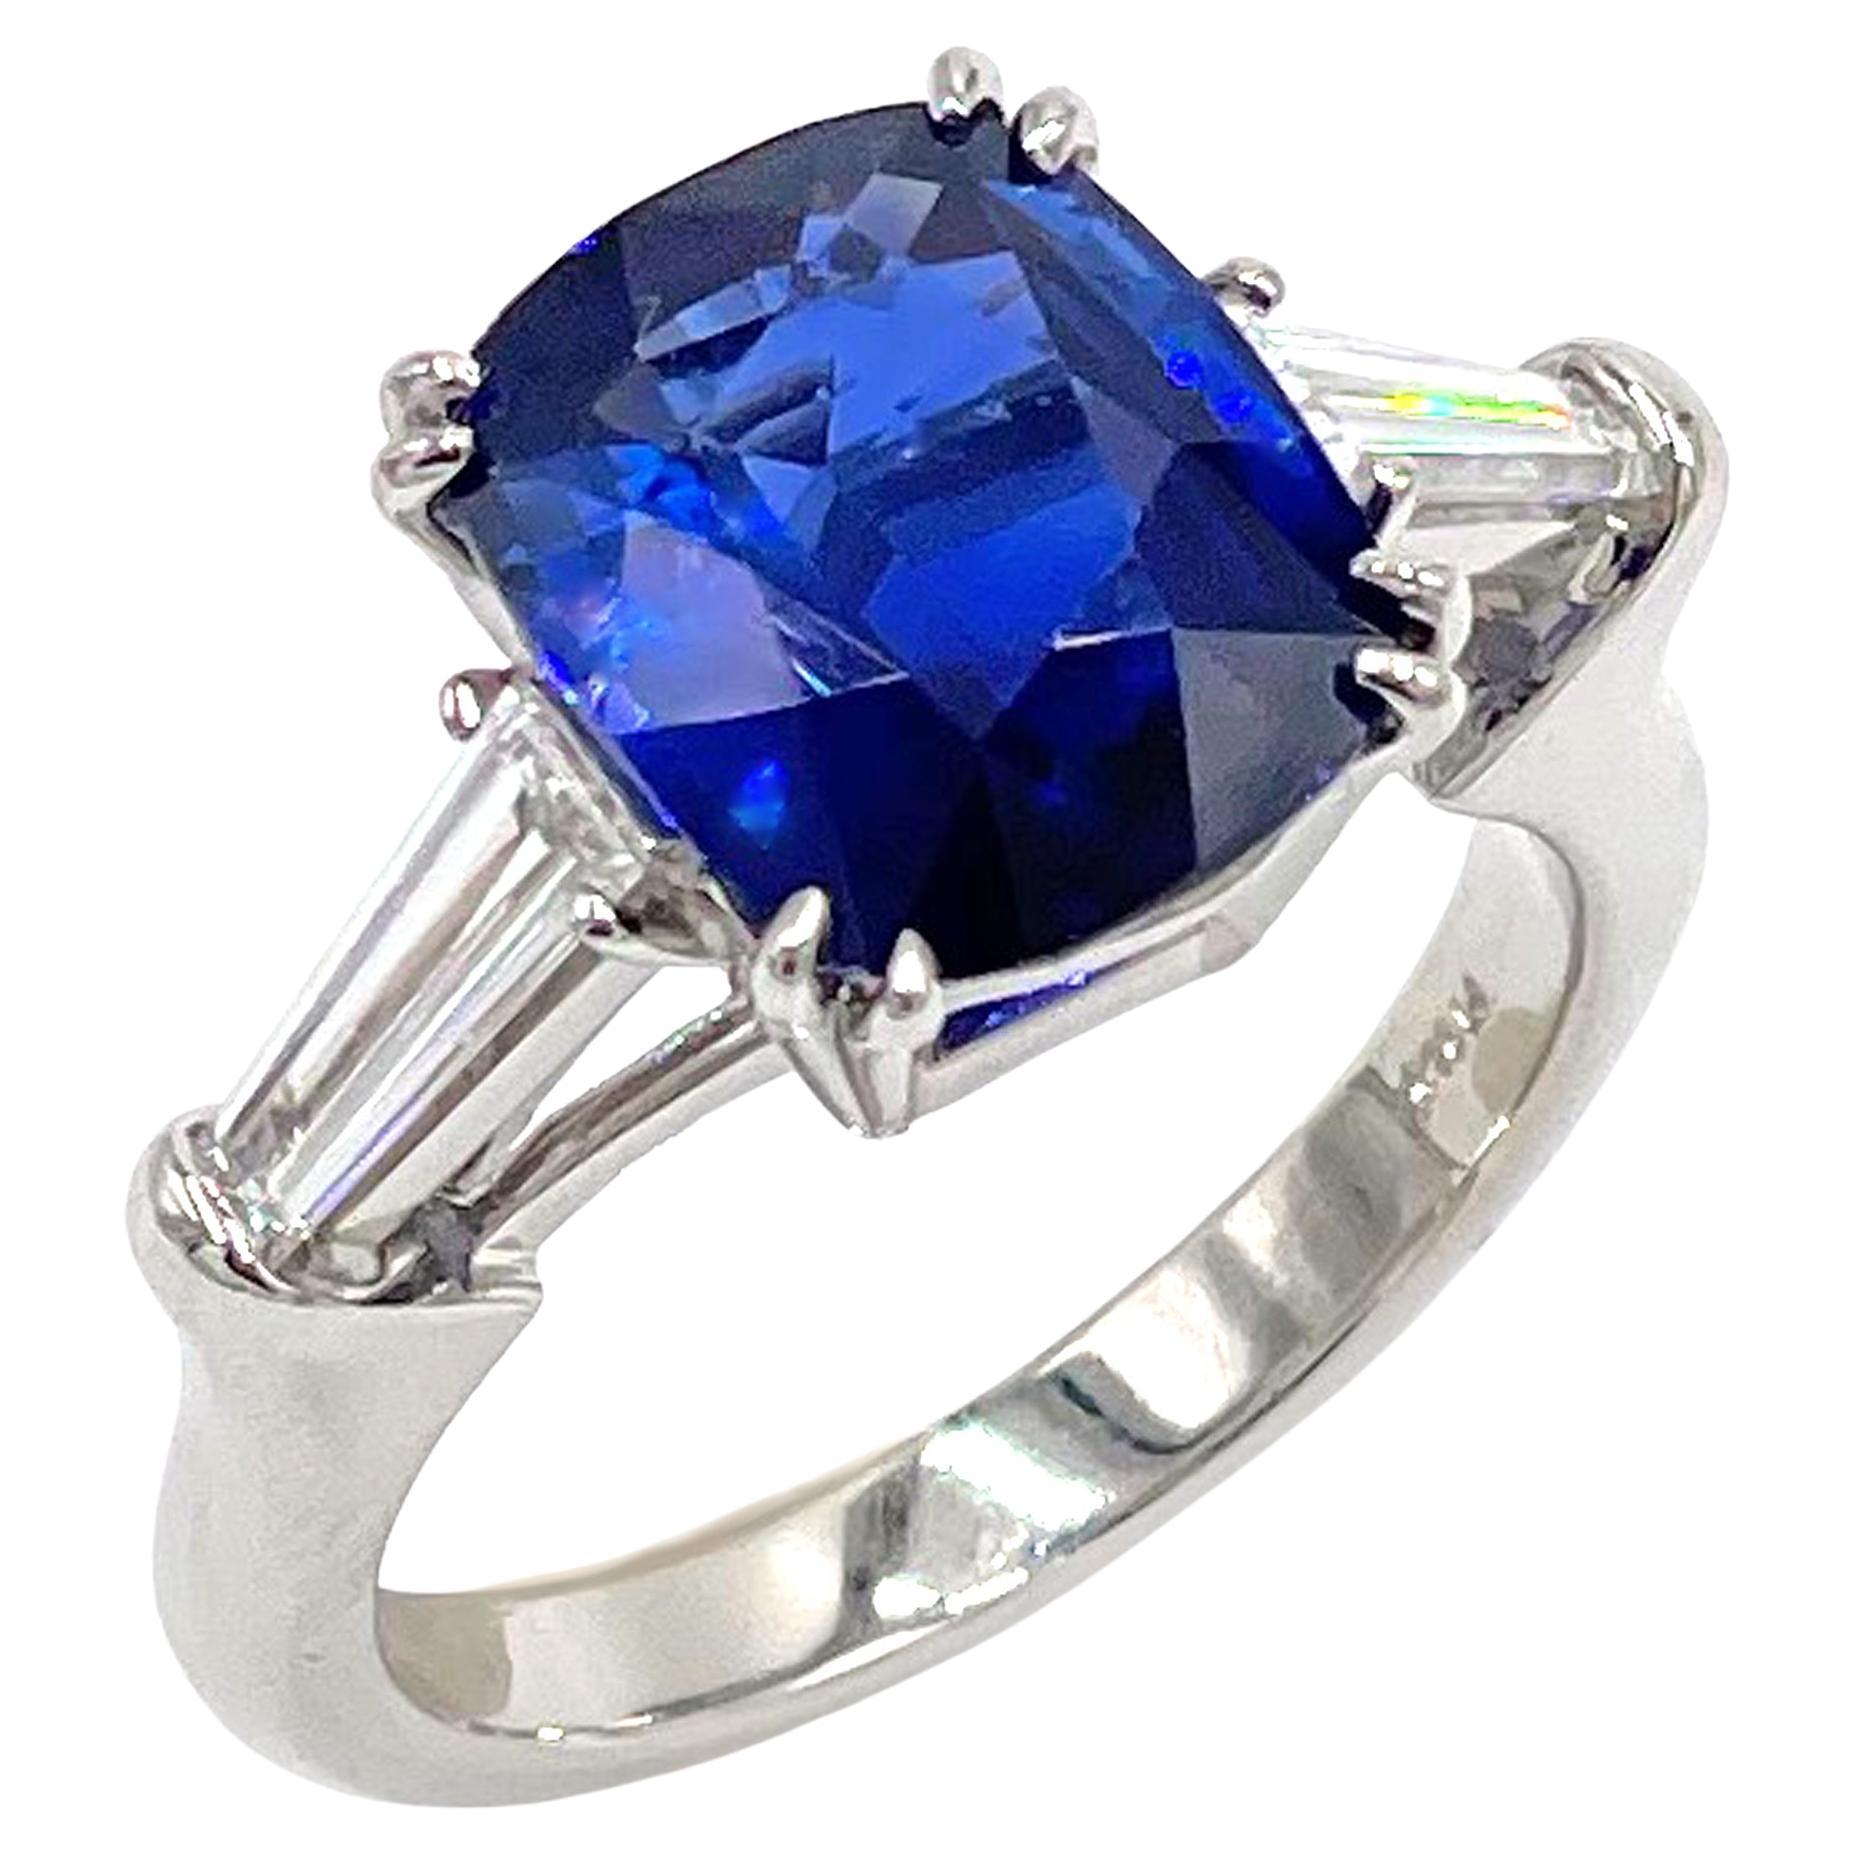 Platinum Hand Made Ring with Baguettes and Ceylon Sapphire, Certified